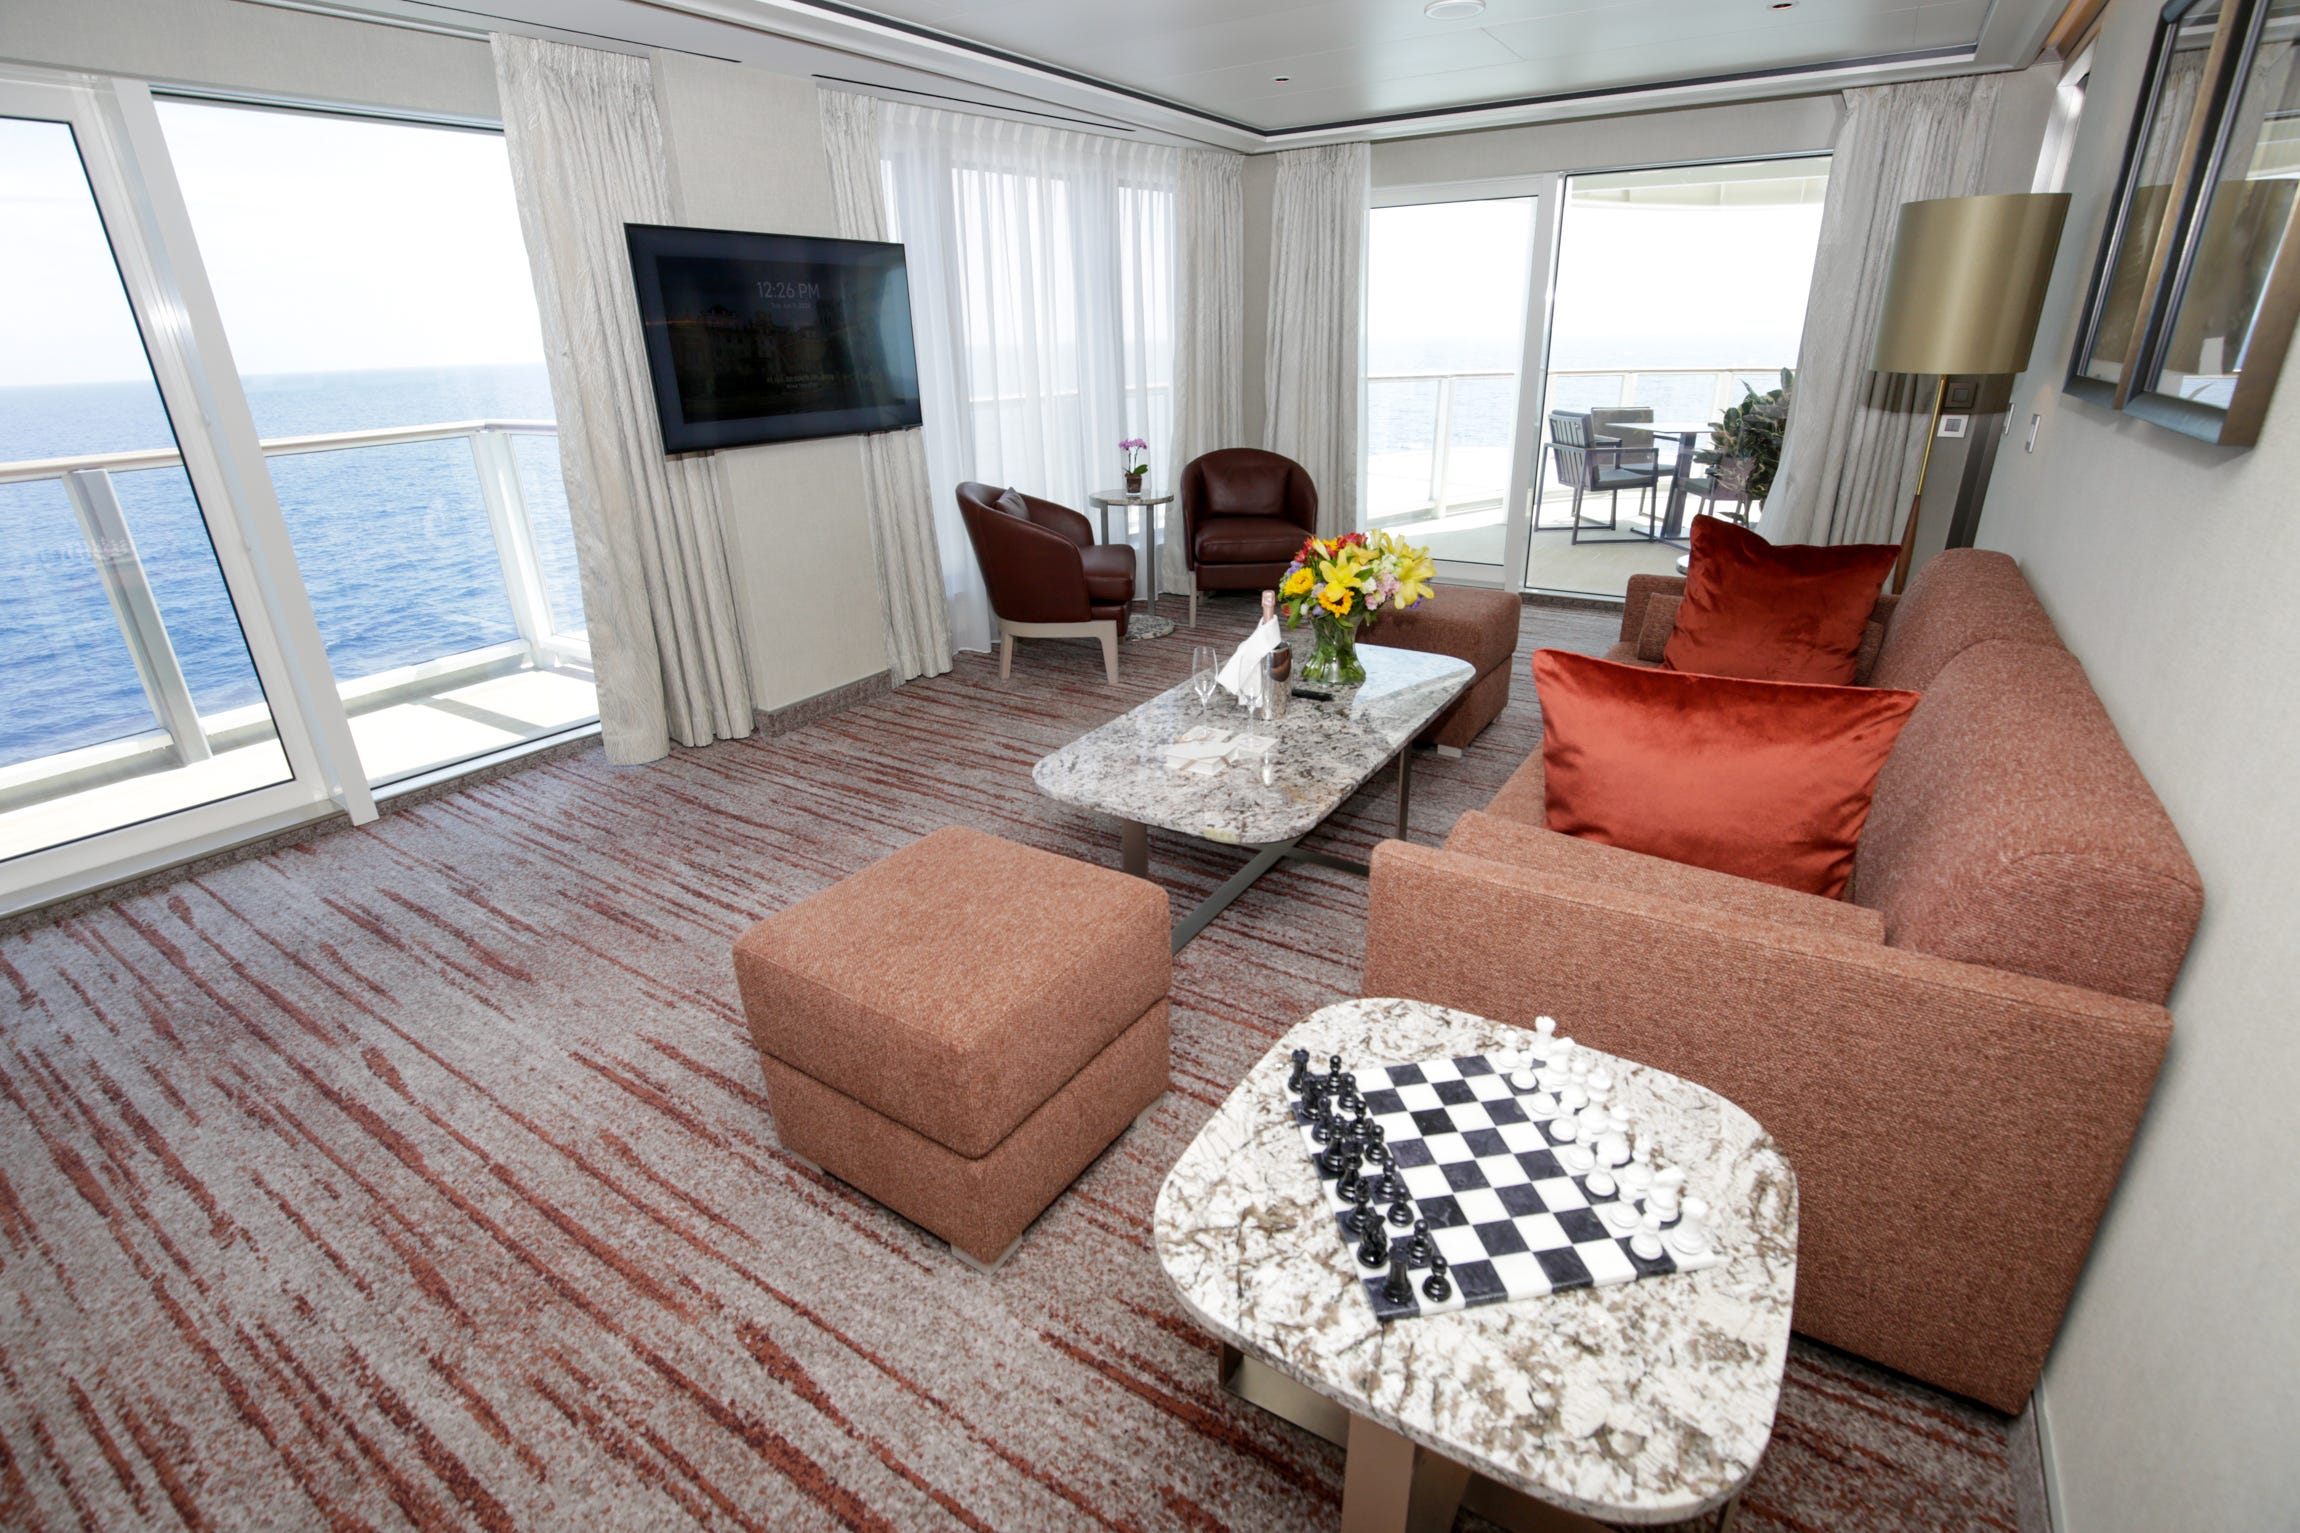 <p>The ship's accommodations range from 357 square feet to 1,324 square feet. </p><p>The <a href="https://www.businessinsider.com/most-expensive-ultra-luxury-cruise-cabin-silversea-new-ship-suite-2024-6">largest suite on Silver Ray</a>, of which there are two, comes with a private hot tub, a library, and a starting cost of $17,000 per person.</p><p>However, even the smallest accommodations still have walk-in closets and marble bathrooms.</p>